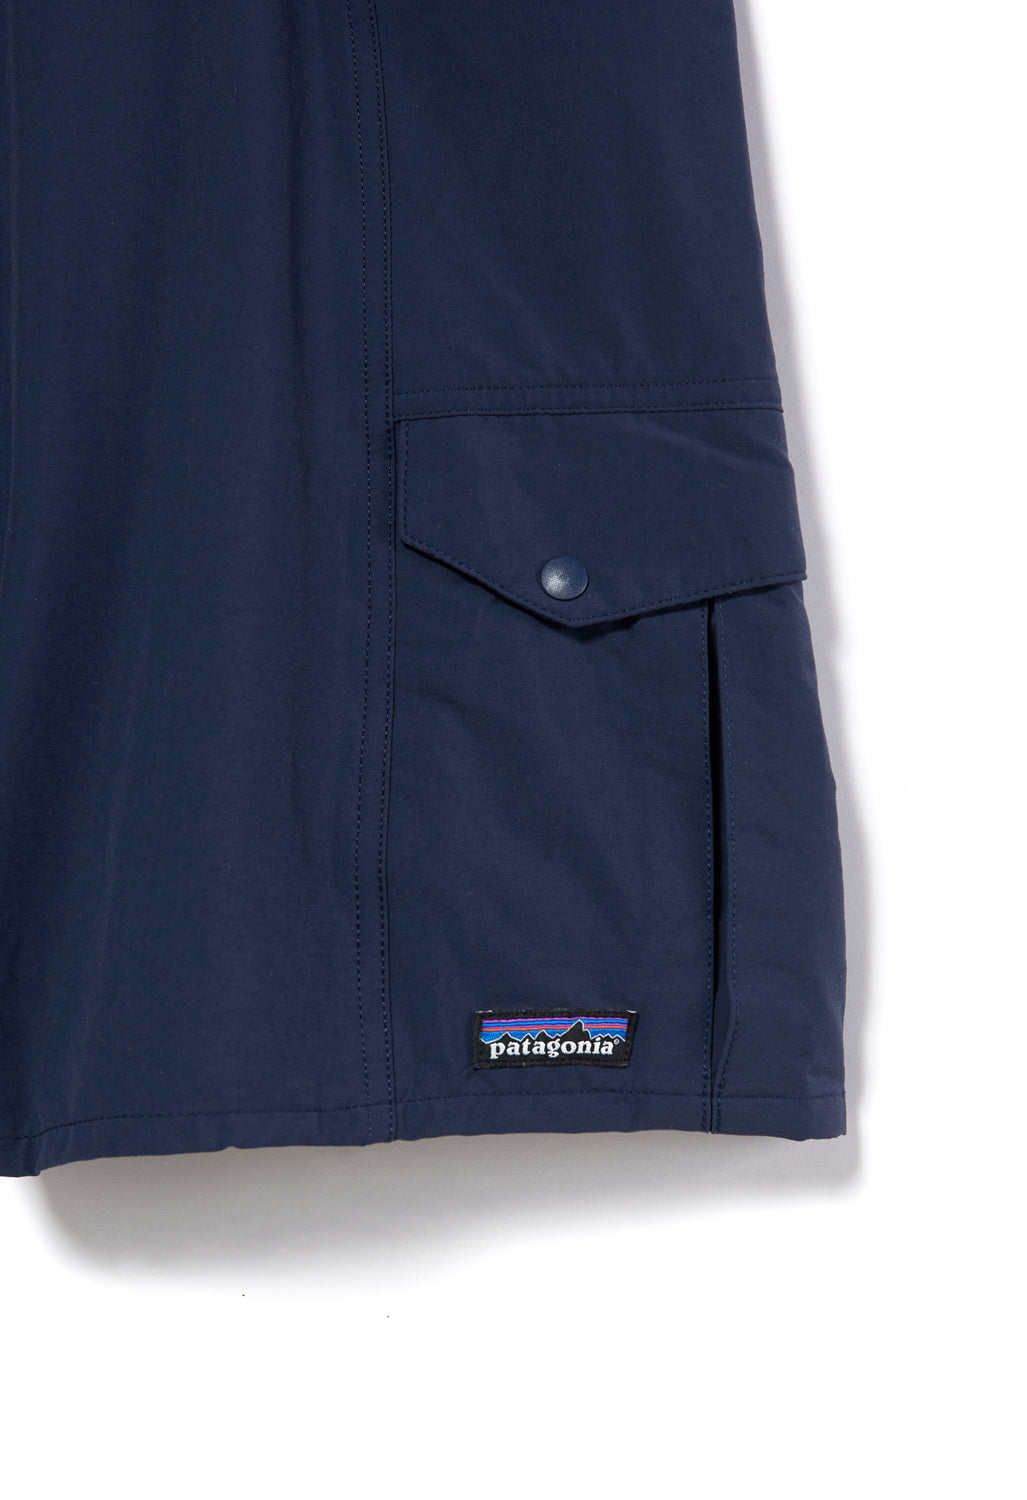 Patagonia Men's Outdoor Everyday 7" Shorts - New Navy